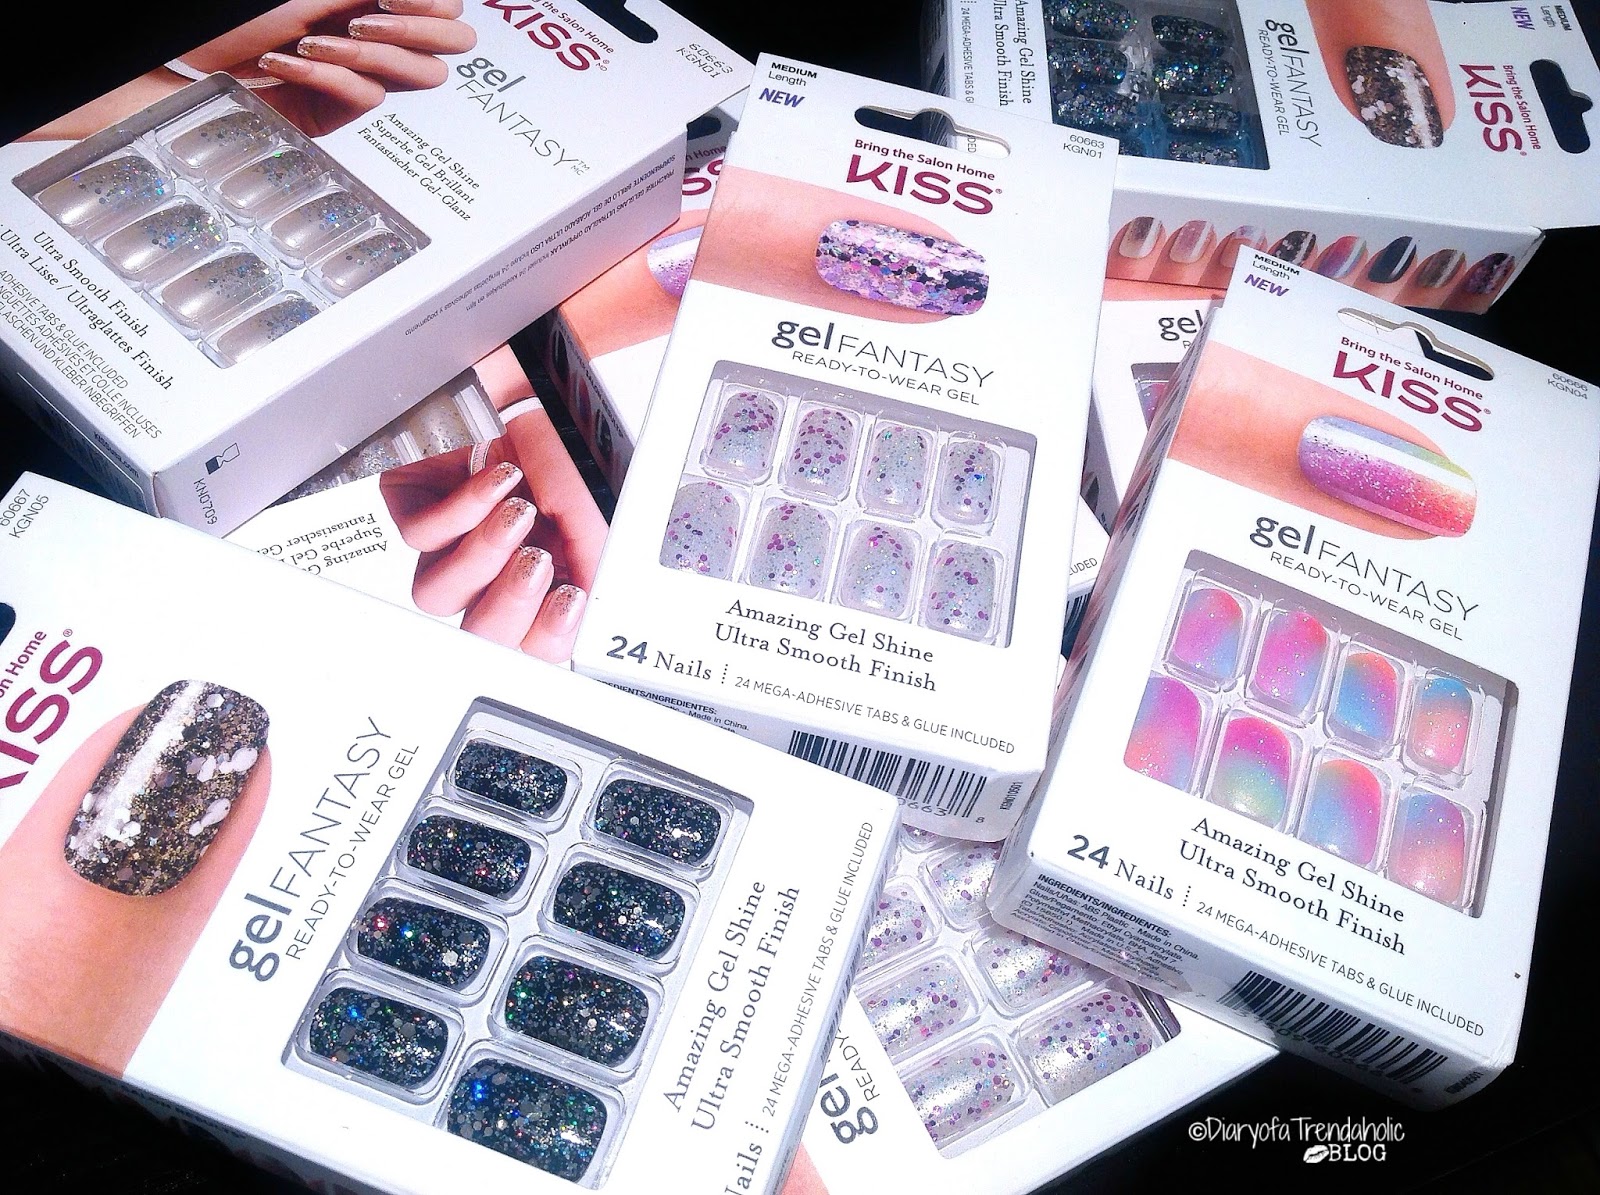 Diary of a Trendaholic : Kiss Gel Fantasy Ready-To-Wear Nails Review &  Giveaway!